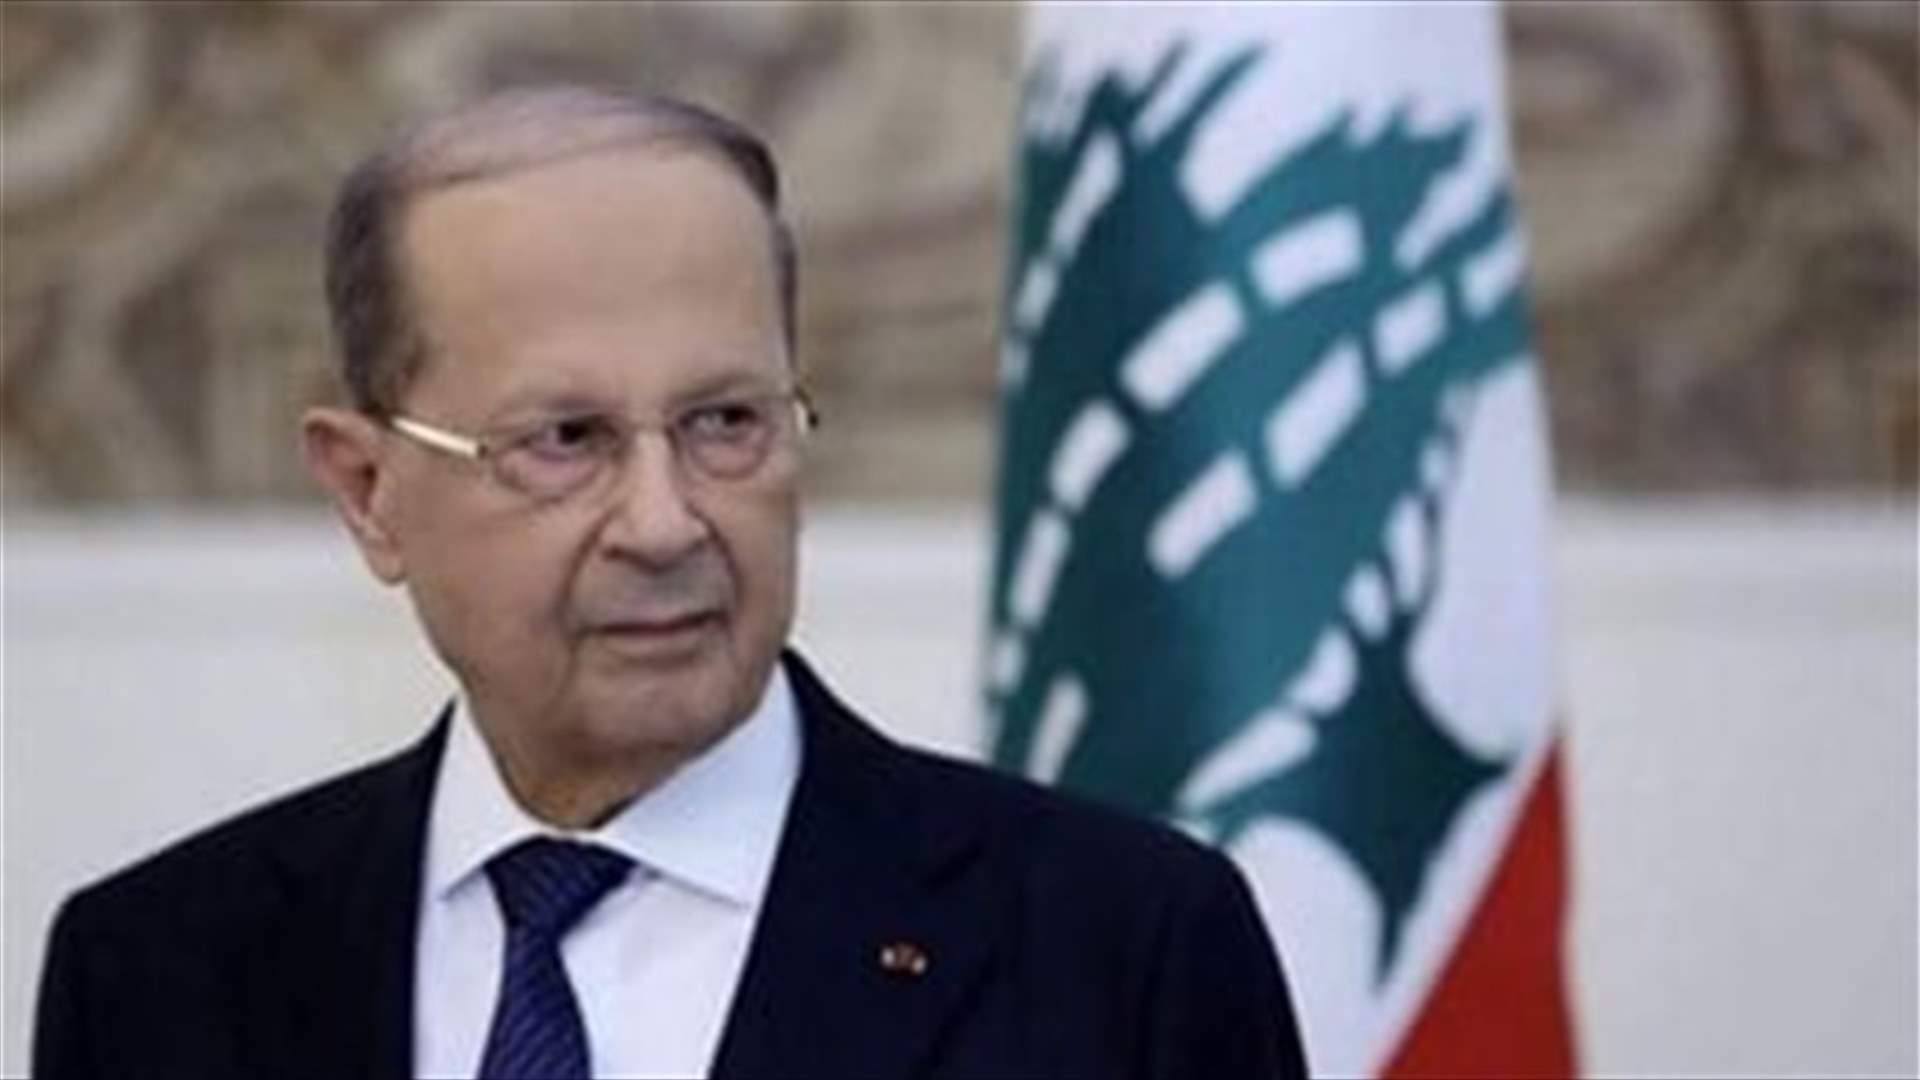 Aoun: Last year of my tenure will be a year of real reforms